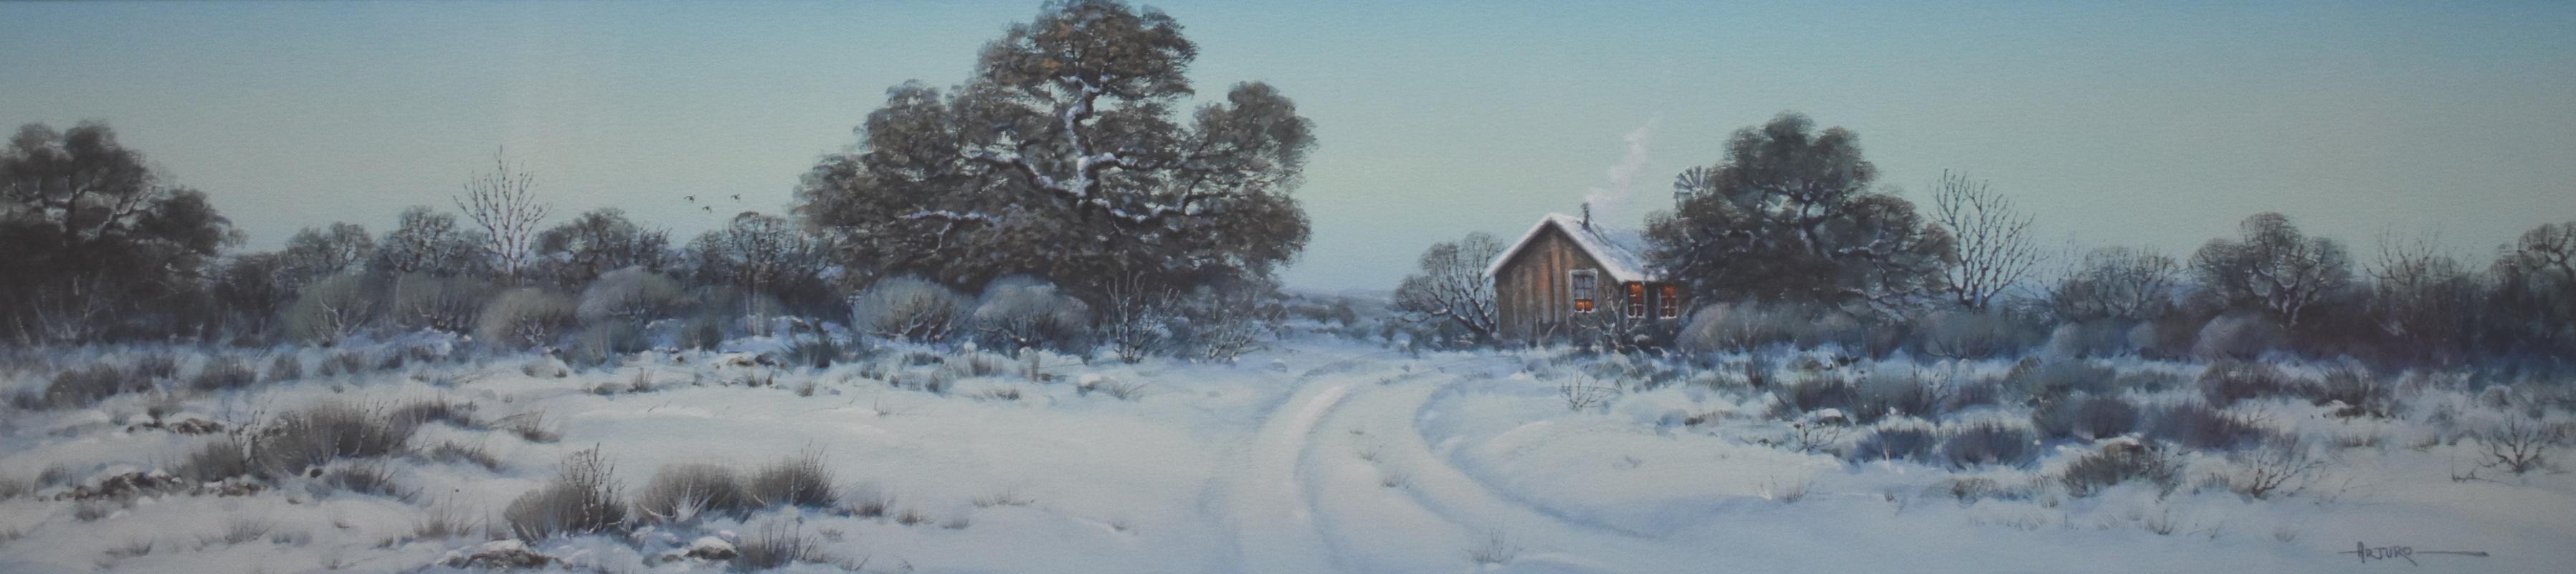 Arturo Mercado Landscape Painting - "Texas Ranch in Snow" Texas Hill Country in Snow at Dusk